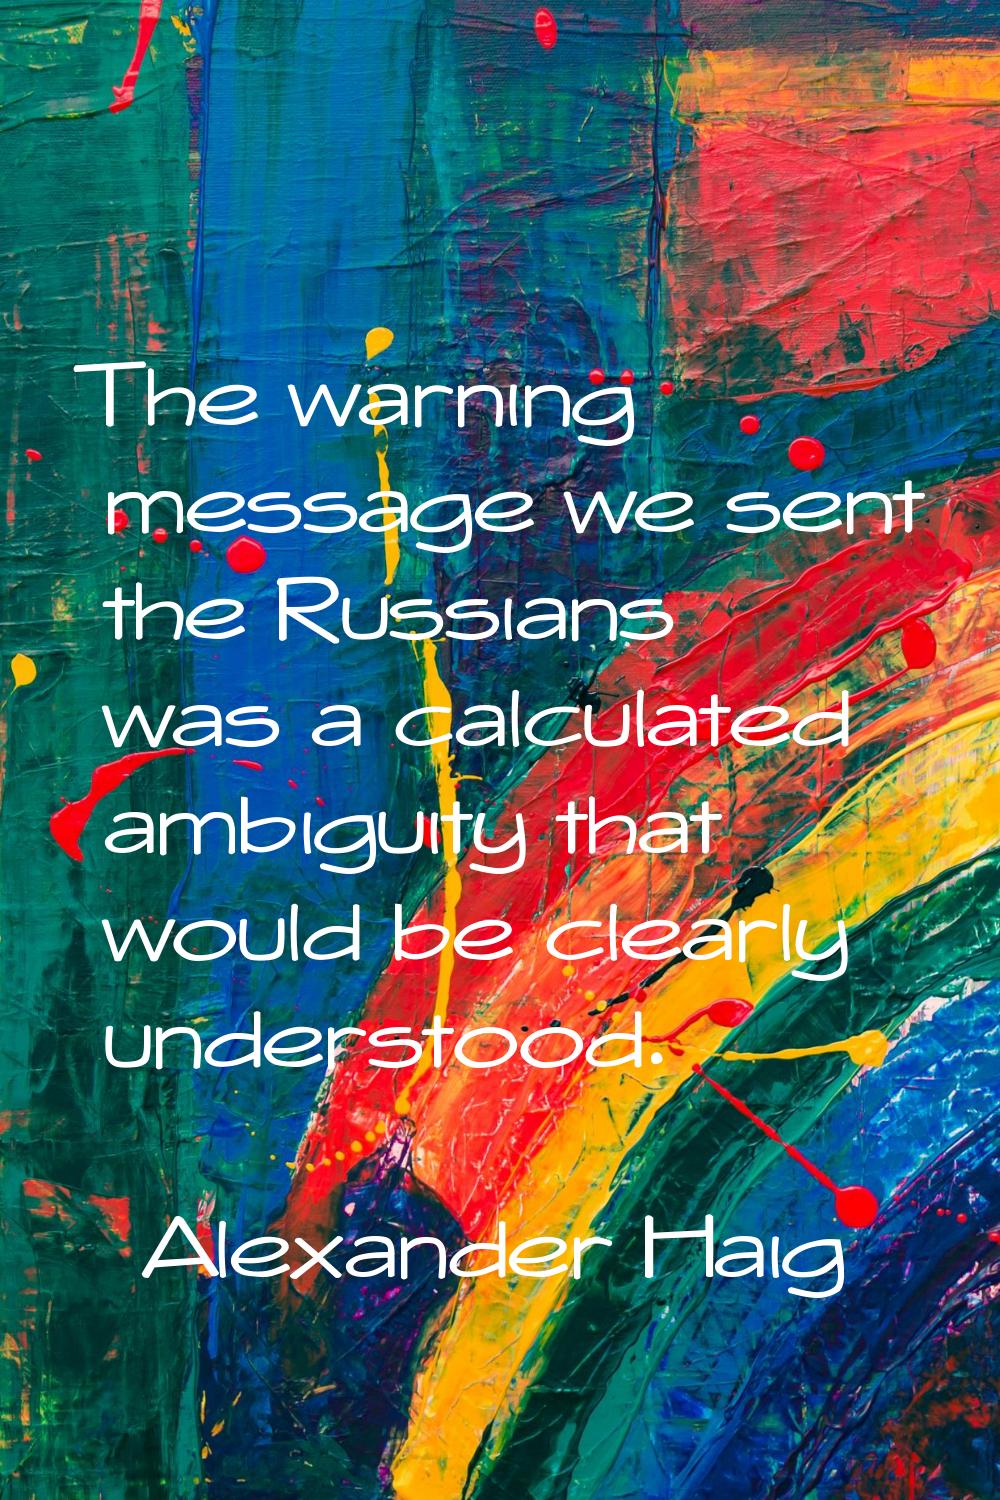 The warning message we sent the Russians was a calculated ambiguity that would be clearly understoo